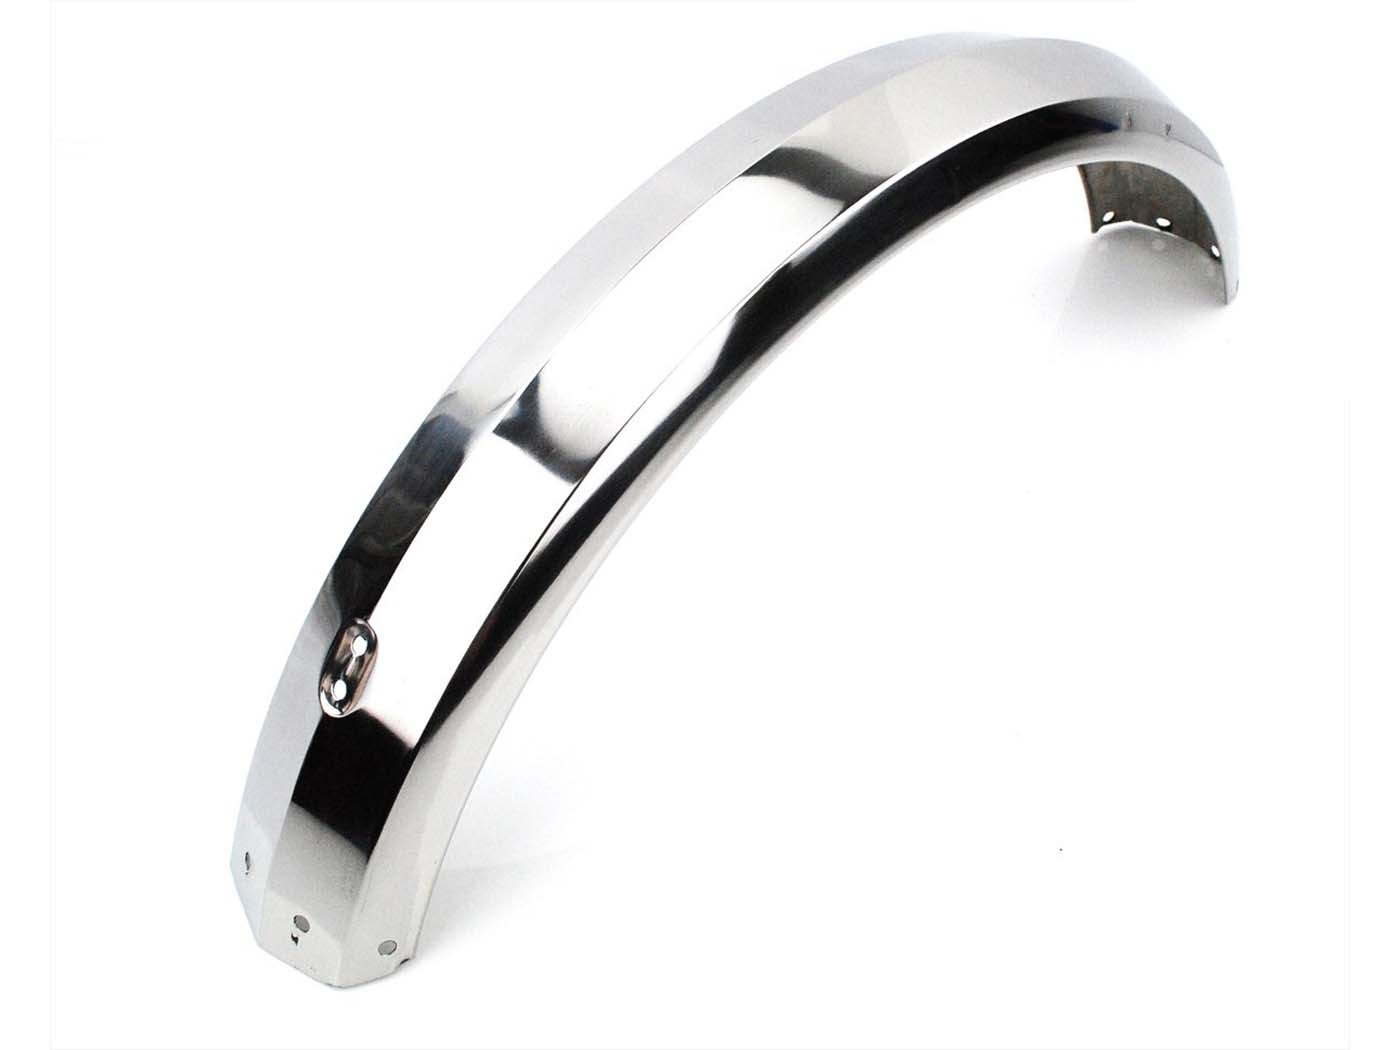 Mudguard INOX For Puch Maxi S N Moped Moped Mokick